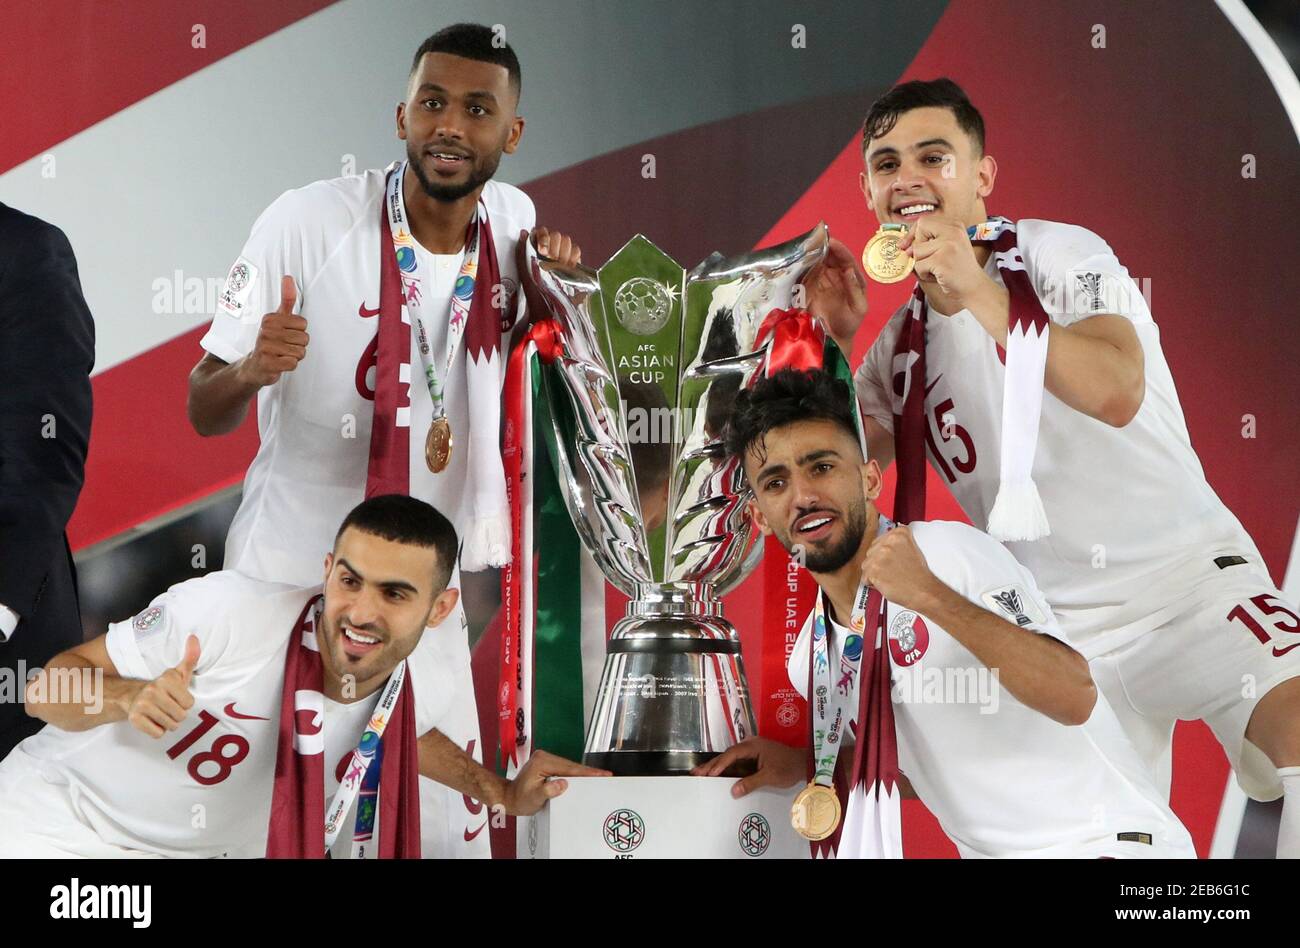 Page 2 - Afc Asian Cup 2019 Qatar Winning High Resolution Stock Photography  and Images - Alamy